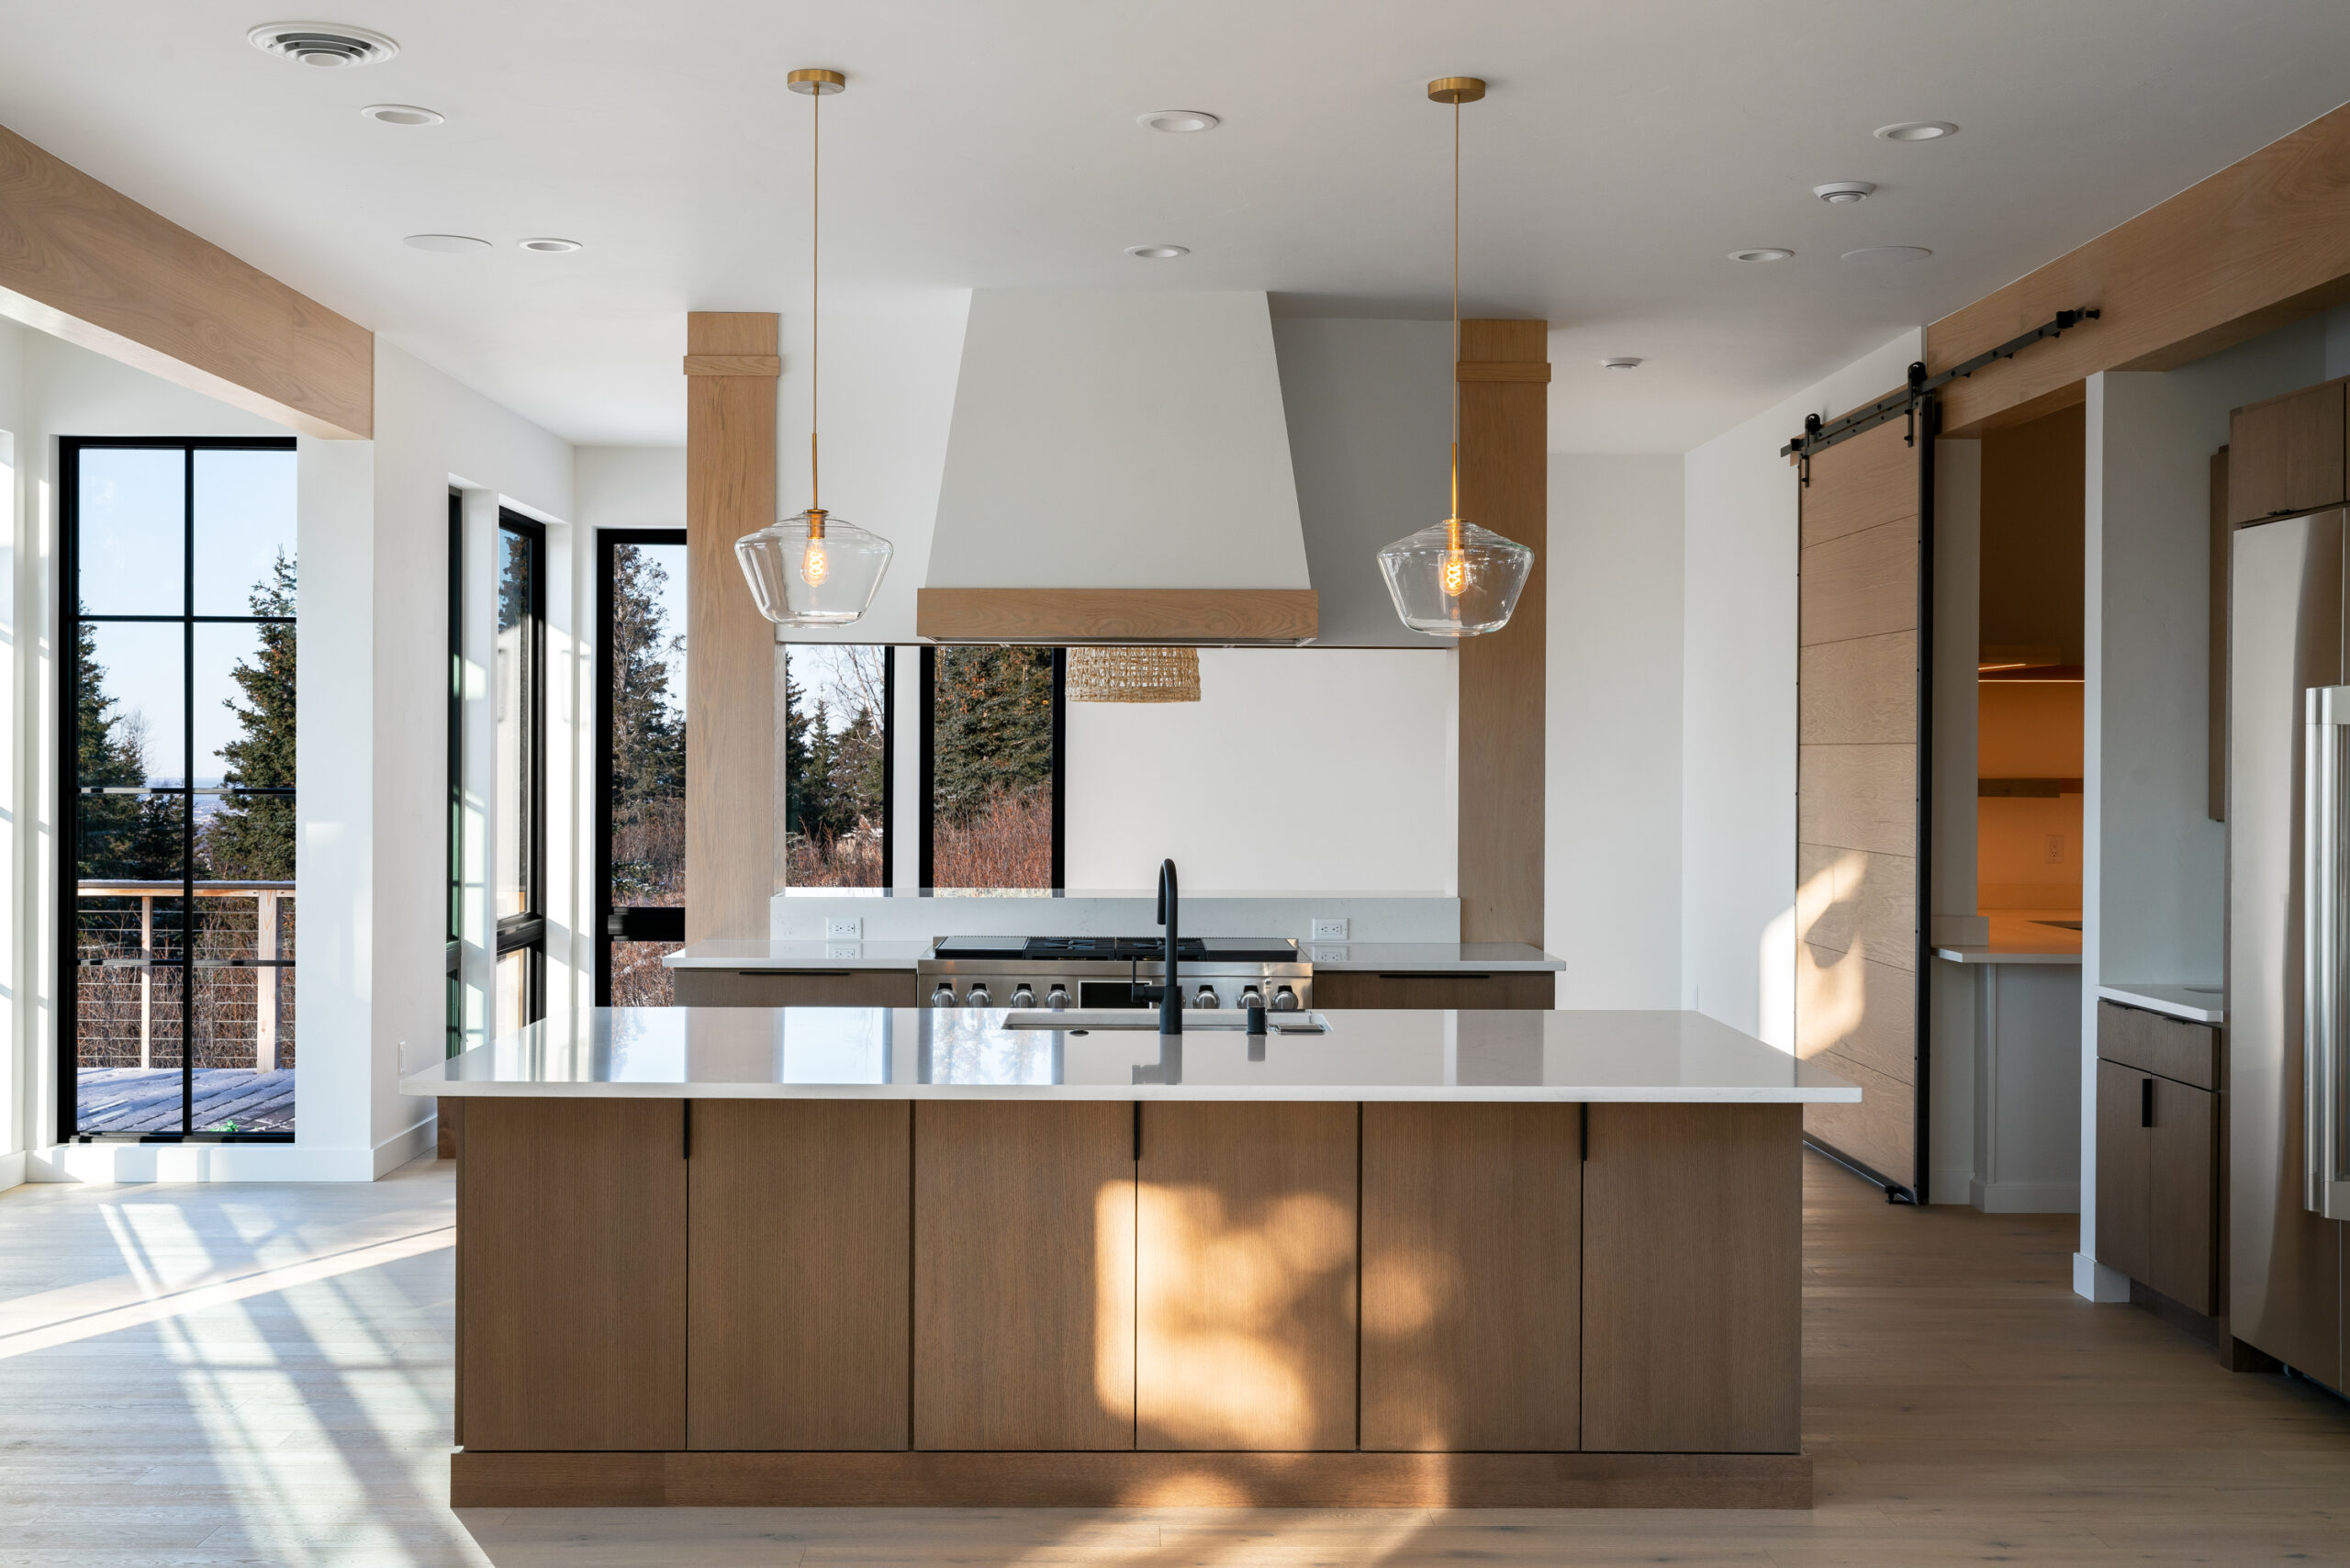 The photograph, taken by Marcus Biastock in Anchorage, Alaska, displays a modern kitchen interior with the following visual elements:

Wooden Island & White Countertop: The central wooden island is topped with a pristine white countertop, featuring a built-in sink and faucet.
Pendant Lights: Above the island, three pendant lights with gold accents provide elegant illumination.
Natural Light: Large windows allow daylight to enhance the wooden floors and cabinetry.
Stainless Steel Appliances: Integrated into the wooden cabinetry, adding a sleek touch to the space.
This image captures the essence of contemporary design, bathed in the natural beauty of Anchorage’s light. Marcus Biastock’s photography skillfully brings out the luxurious simplicity of the interior